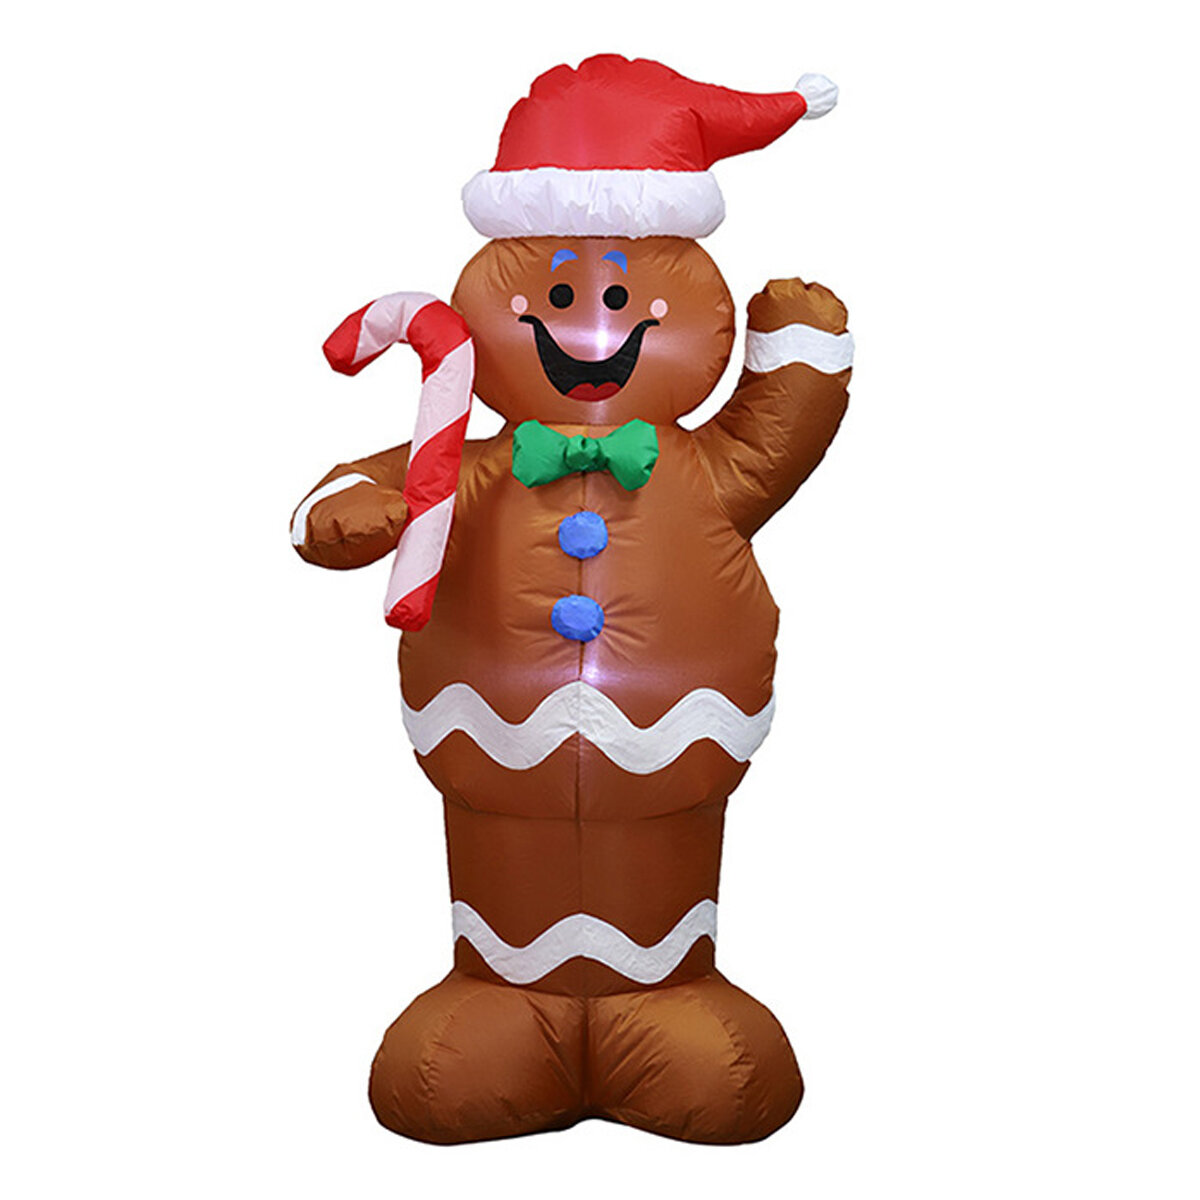 Inflatable 150cm Gingerbread Man Waterproof Polyester Fabric LED Lighting Toy For Christmas Home Party Decoration